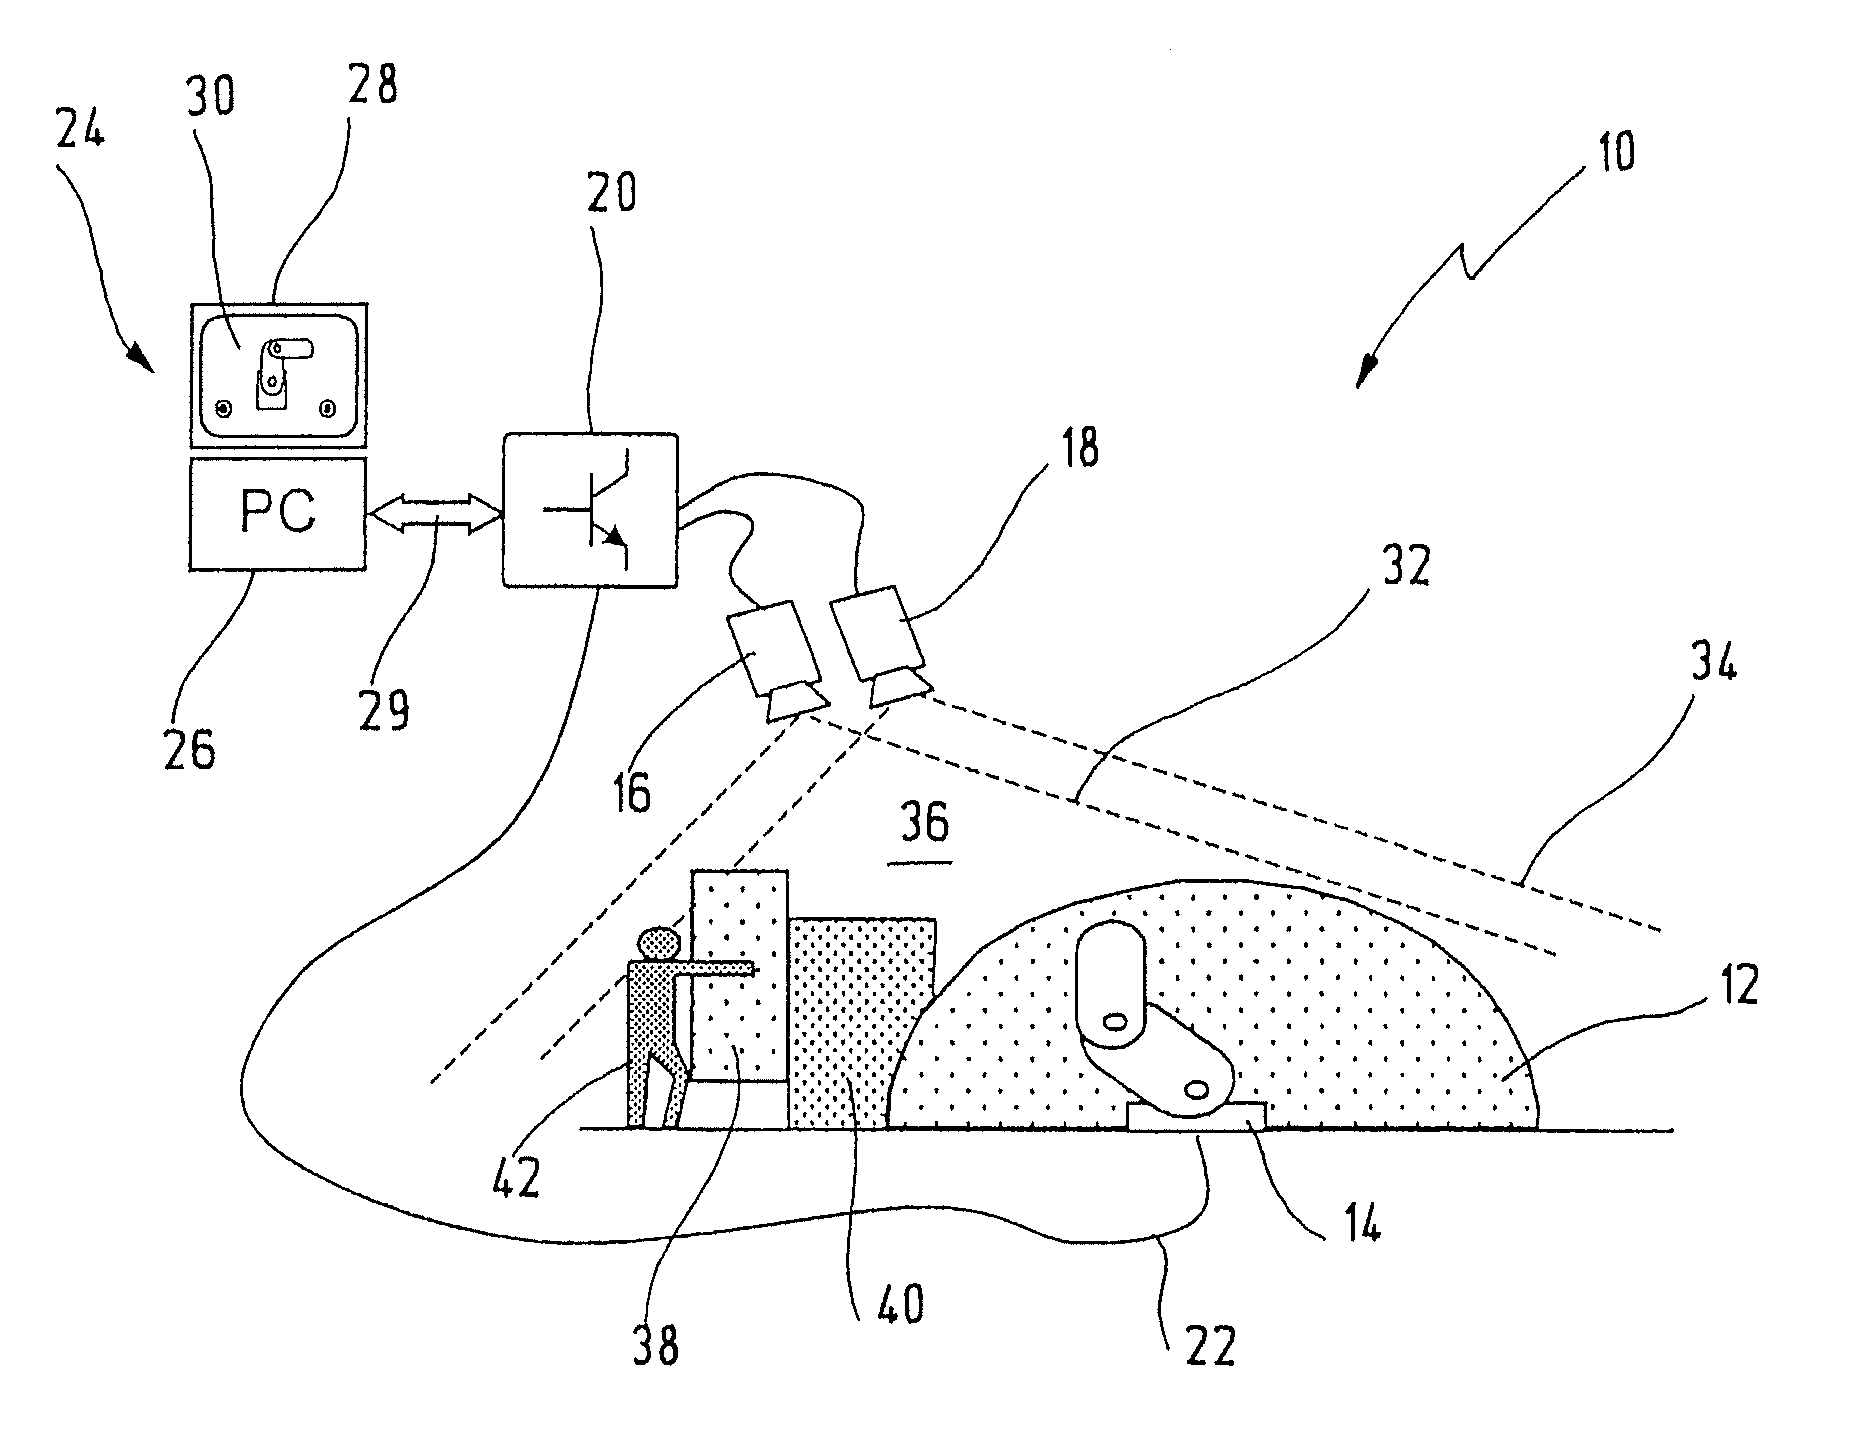 Method and system for configuring a monitoring device for monitoring a spatial area